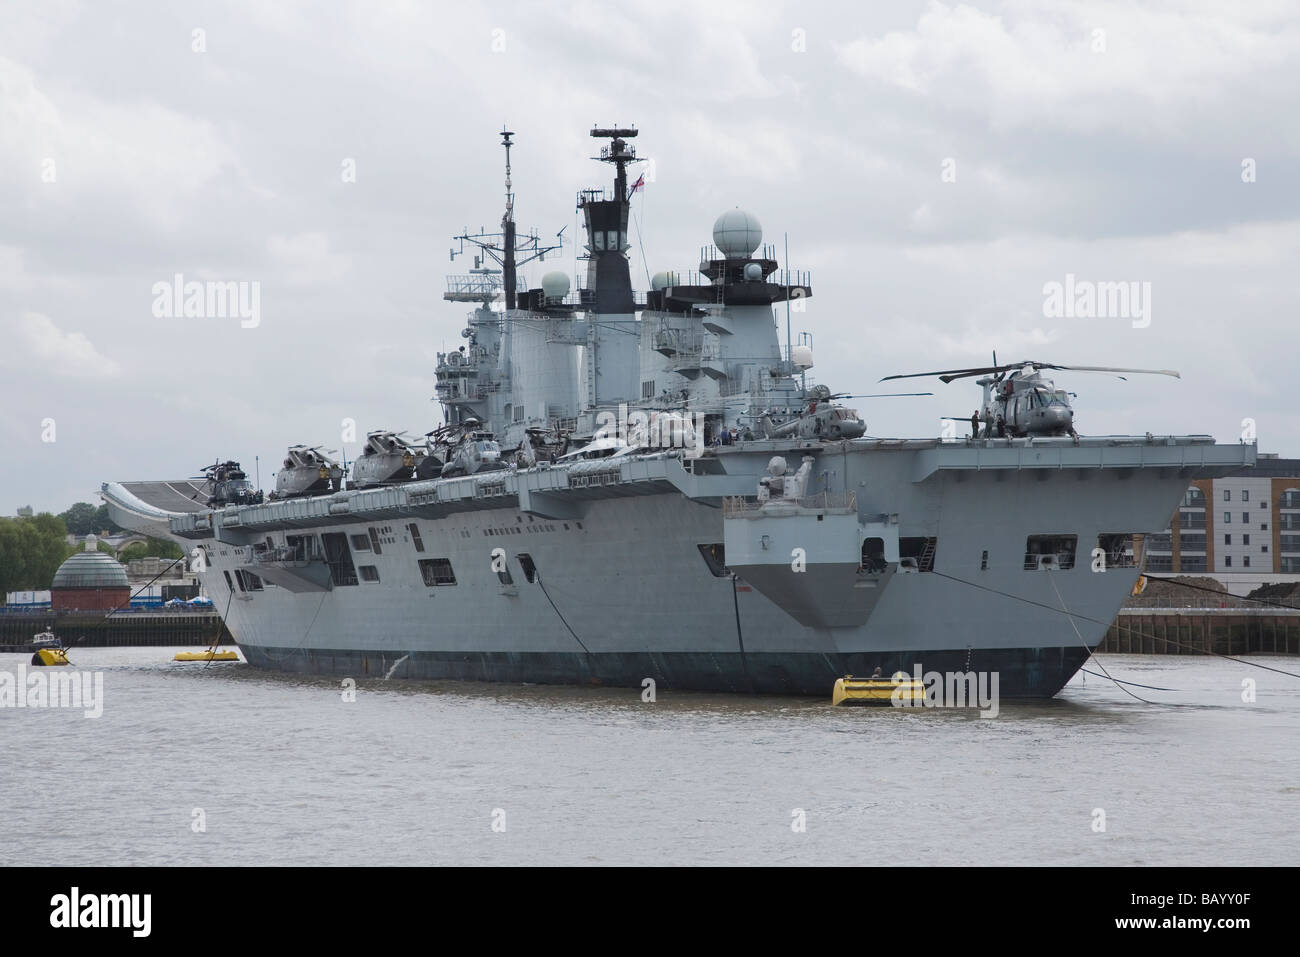 LONDON, ENGLAND - MAY 09: HMS Illustrious, the UK's strike aircraft carrier, moored on the river Thames at Greenwich. Stock Photo